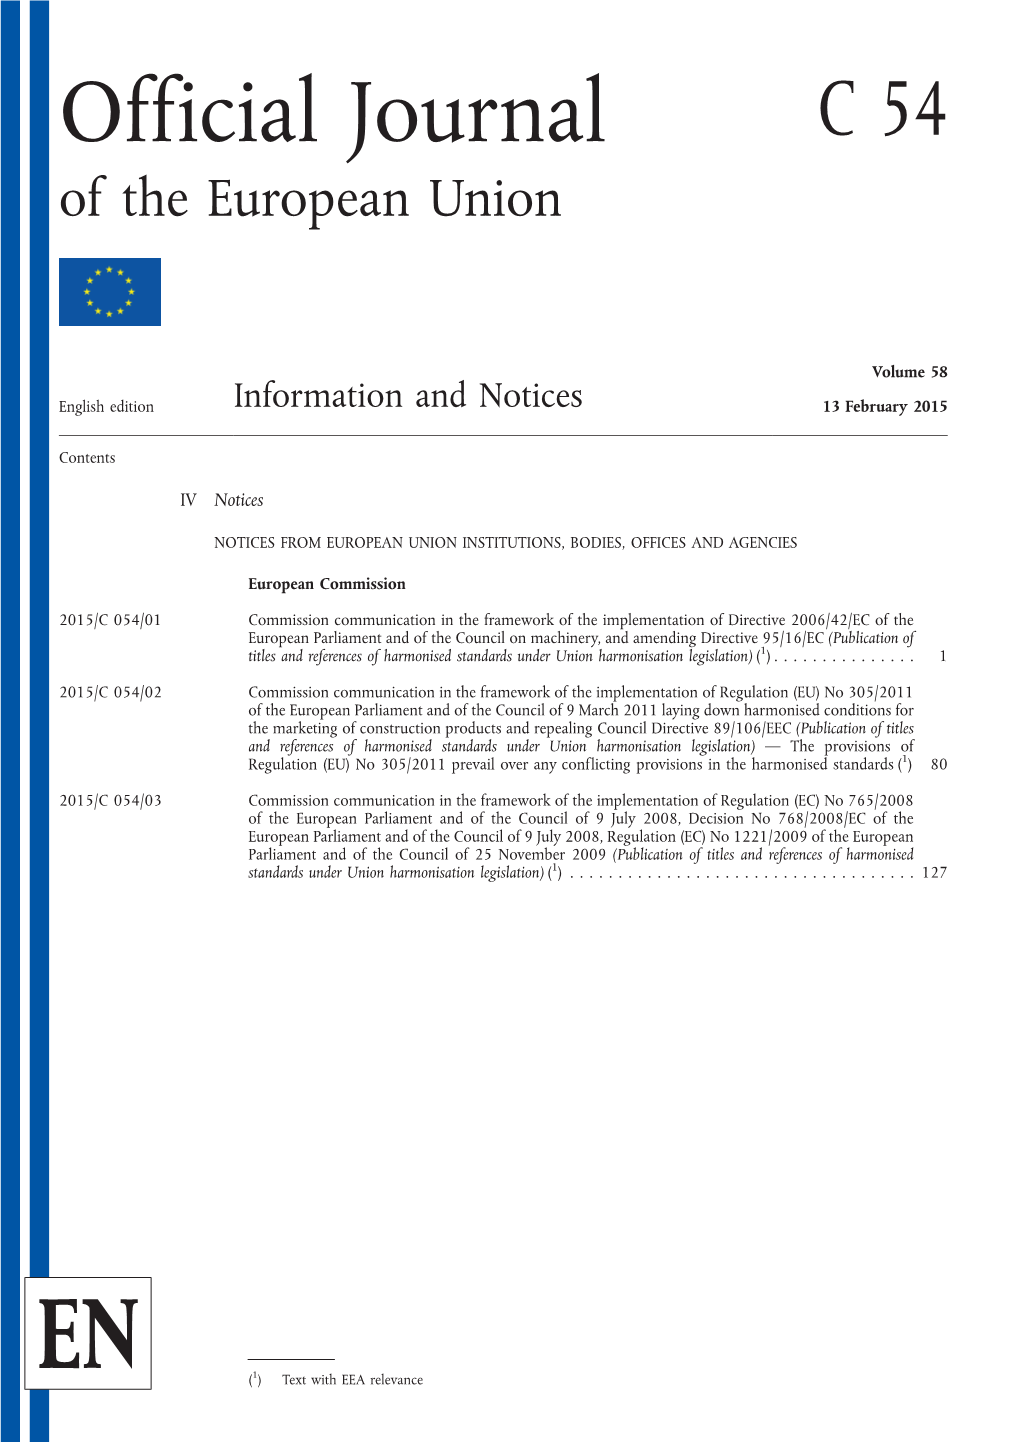 Official Journal of the European Union C 54/1